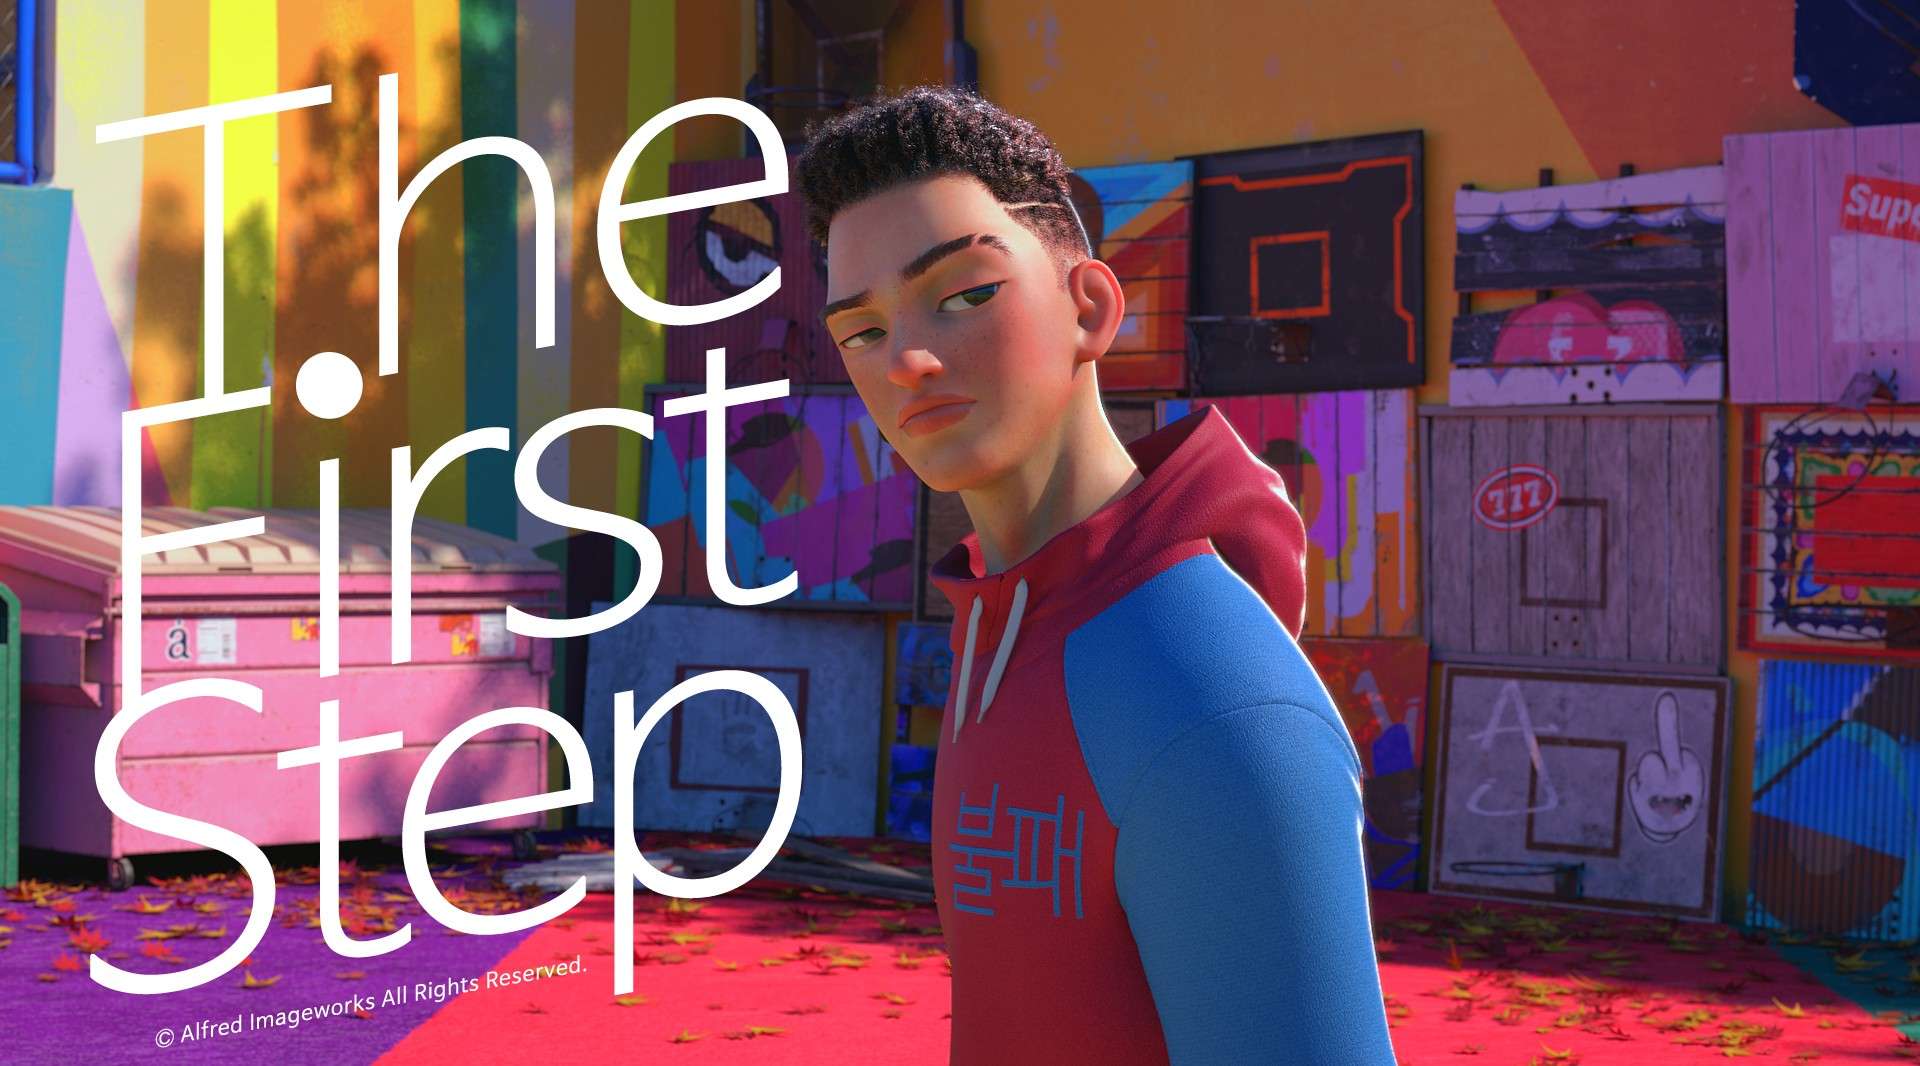 The First Step - Animation Teaser